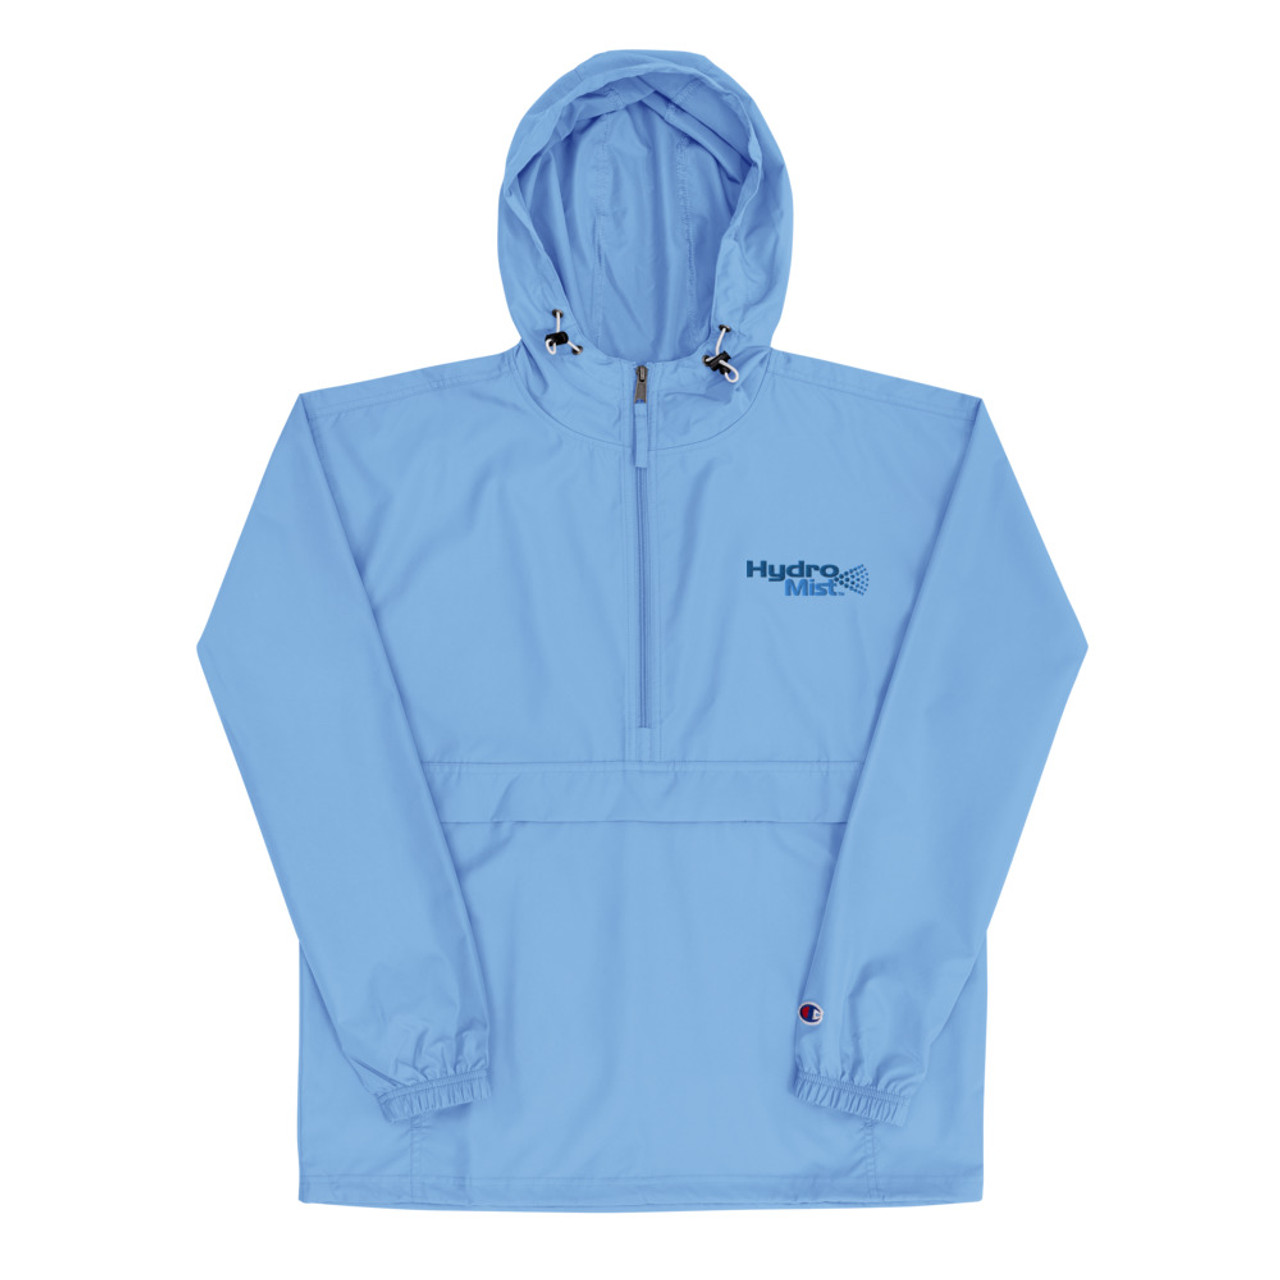 HydroMist Embroidered Champion Packable Jacket